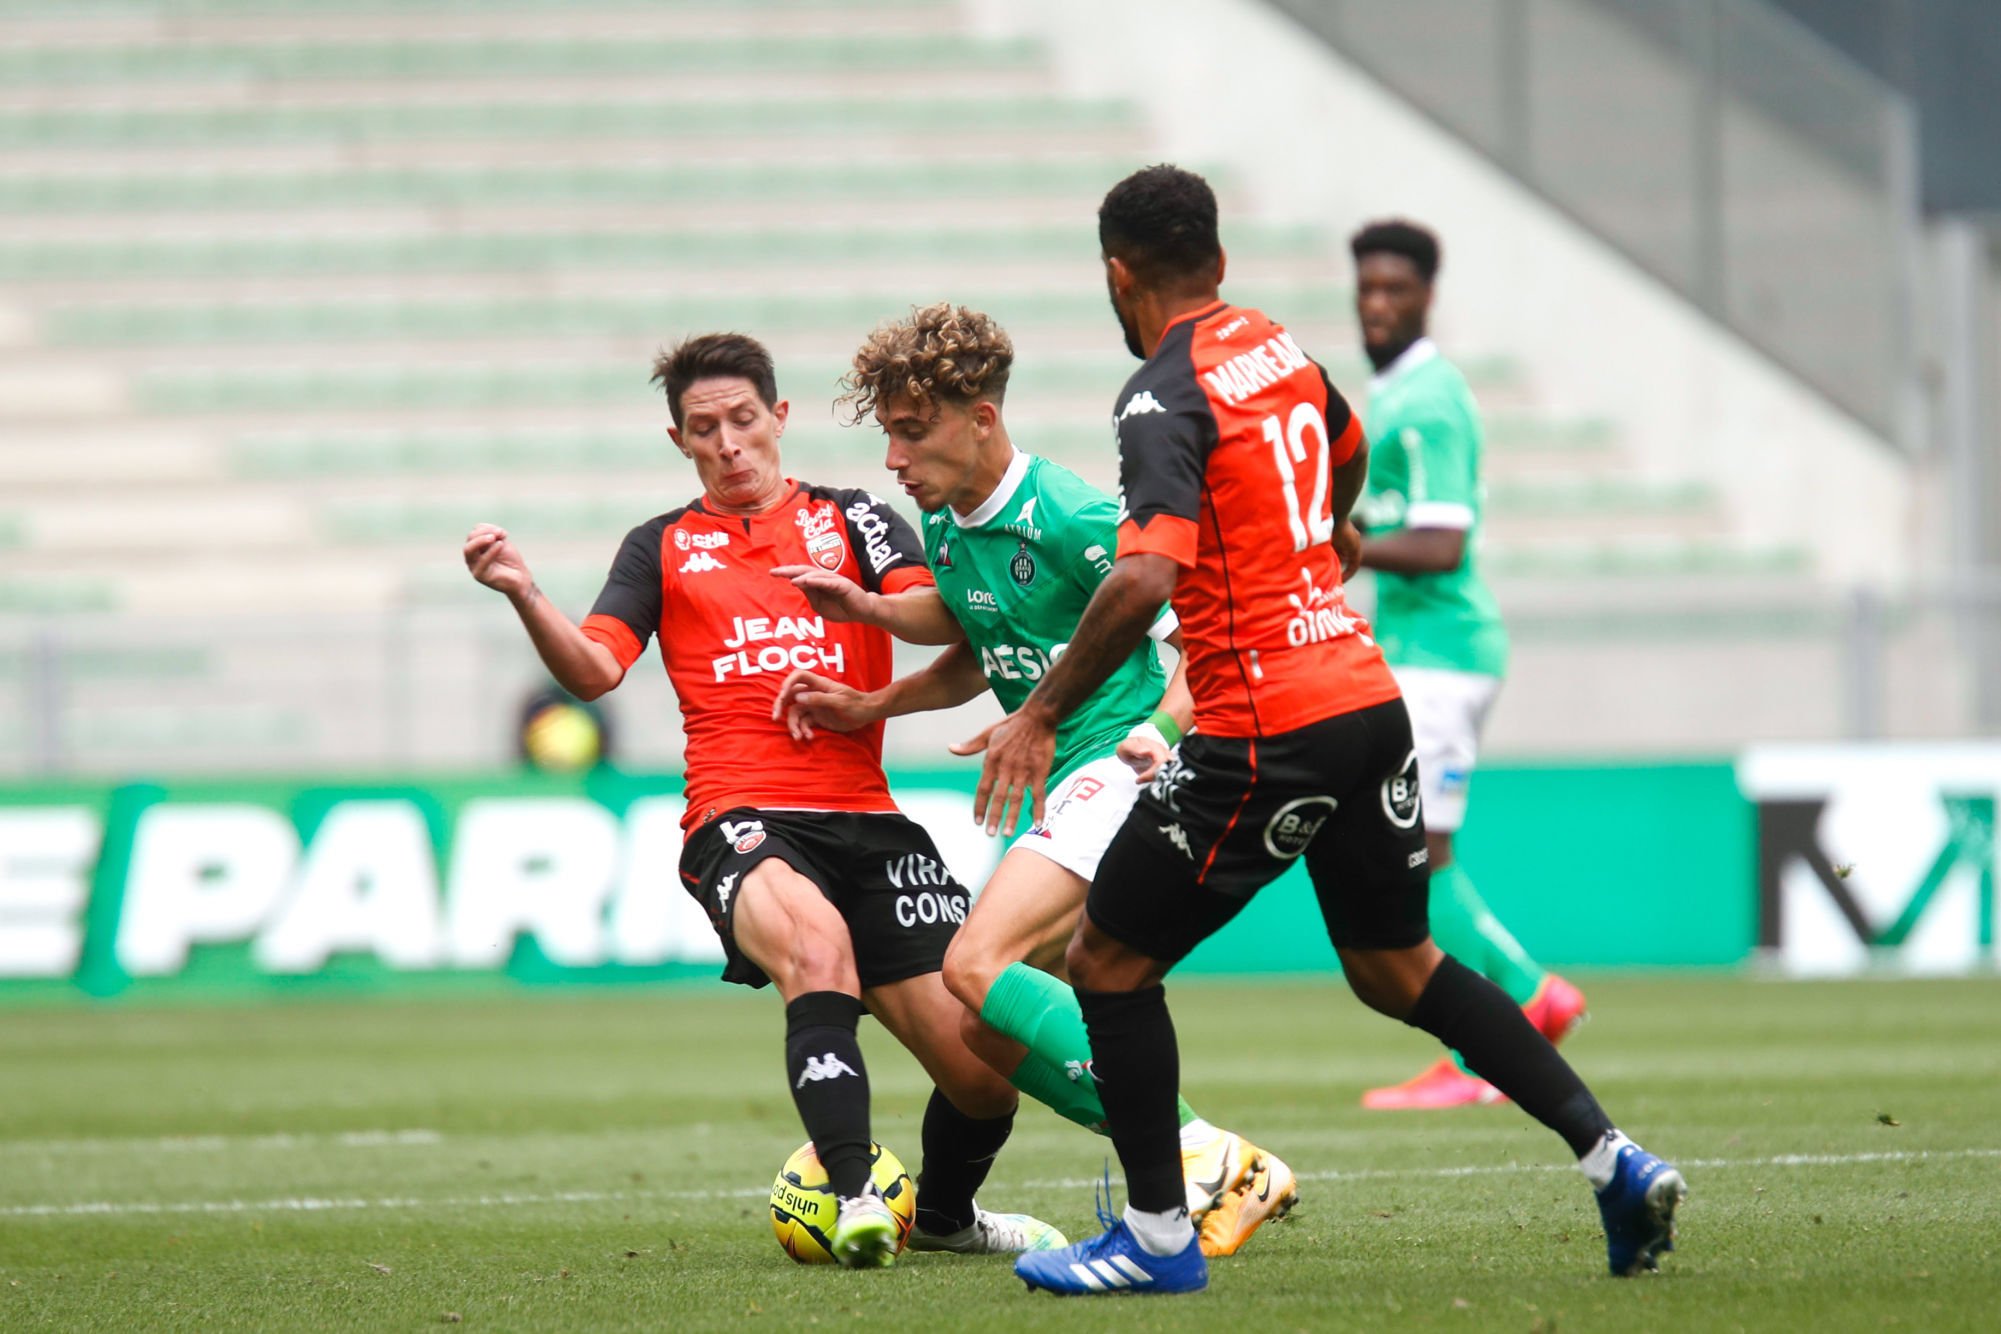 Adil AOUCHICHE of Saint Etienne and Laurent ABERGEL of Lorient during the Ligue 1 match between AS Saint-Etienne and Football Club Lorient, at Geoffroy-Guichard Stadium, Saint-Etienne, France on 30th August 2020. (Photo by Romain Biard/Icon Sport) - Laurent ABERGEL - Adil AOUCHICHE - Stade Geoffroy-Guichard - Saint Etienne (France)